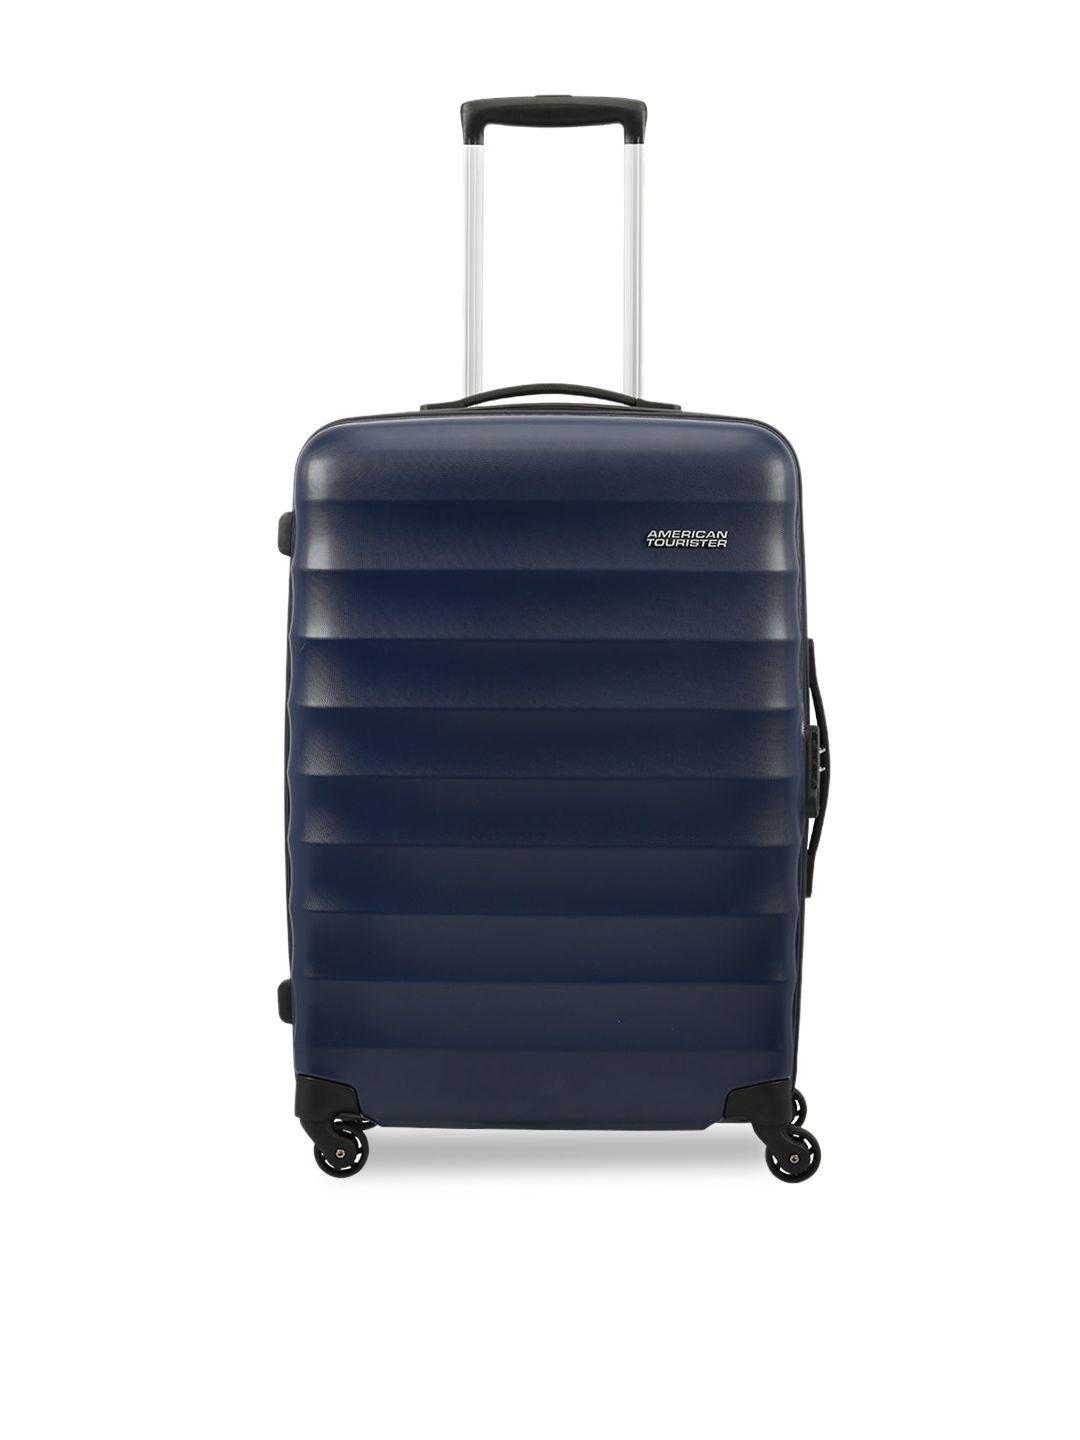 american tourister unisex navy blue solid hard-sided barcelona medium trolley suitcase